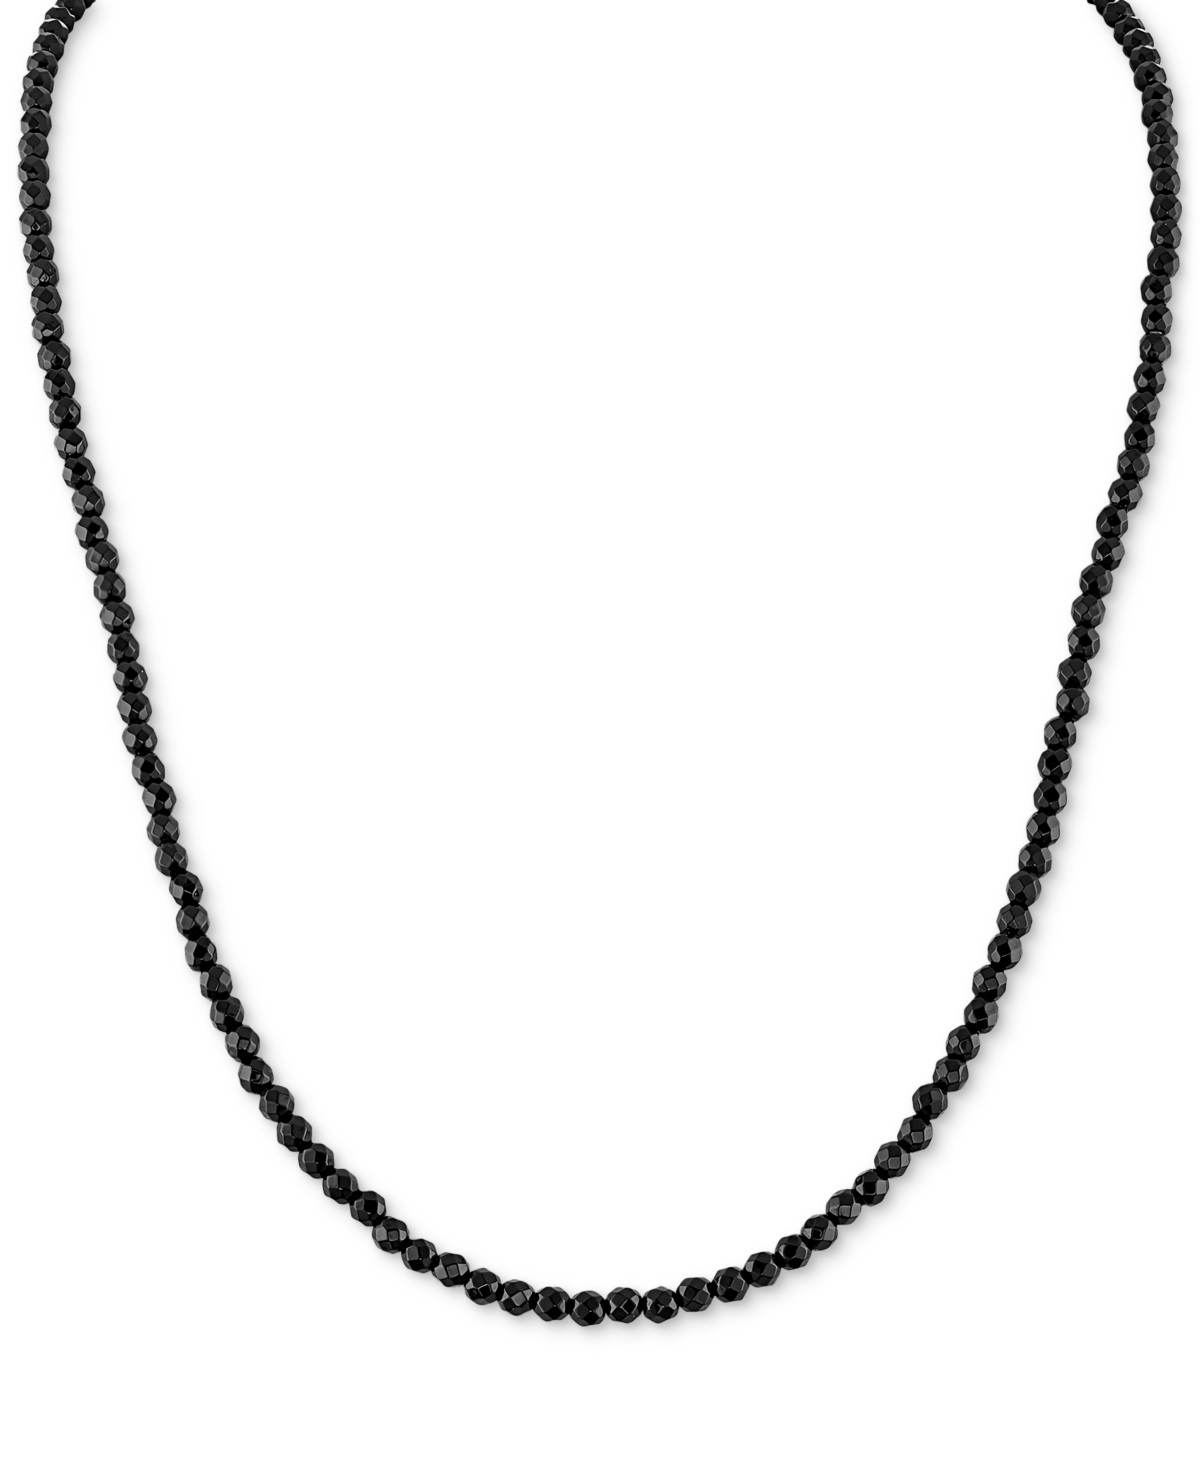 Esquire Men's Jewelry Black Spinel Beaded 22" Statement Necklace In Sterling Silver, Created For Macy's